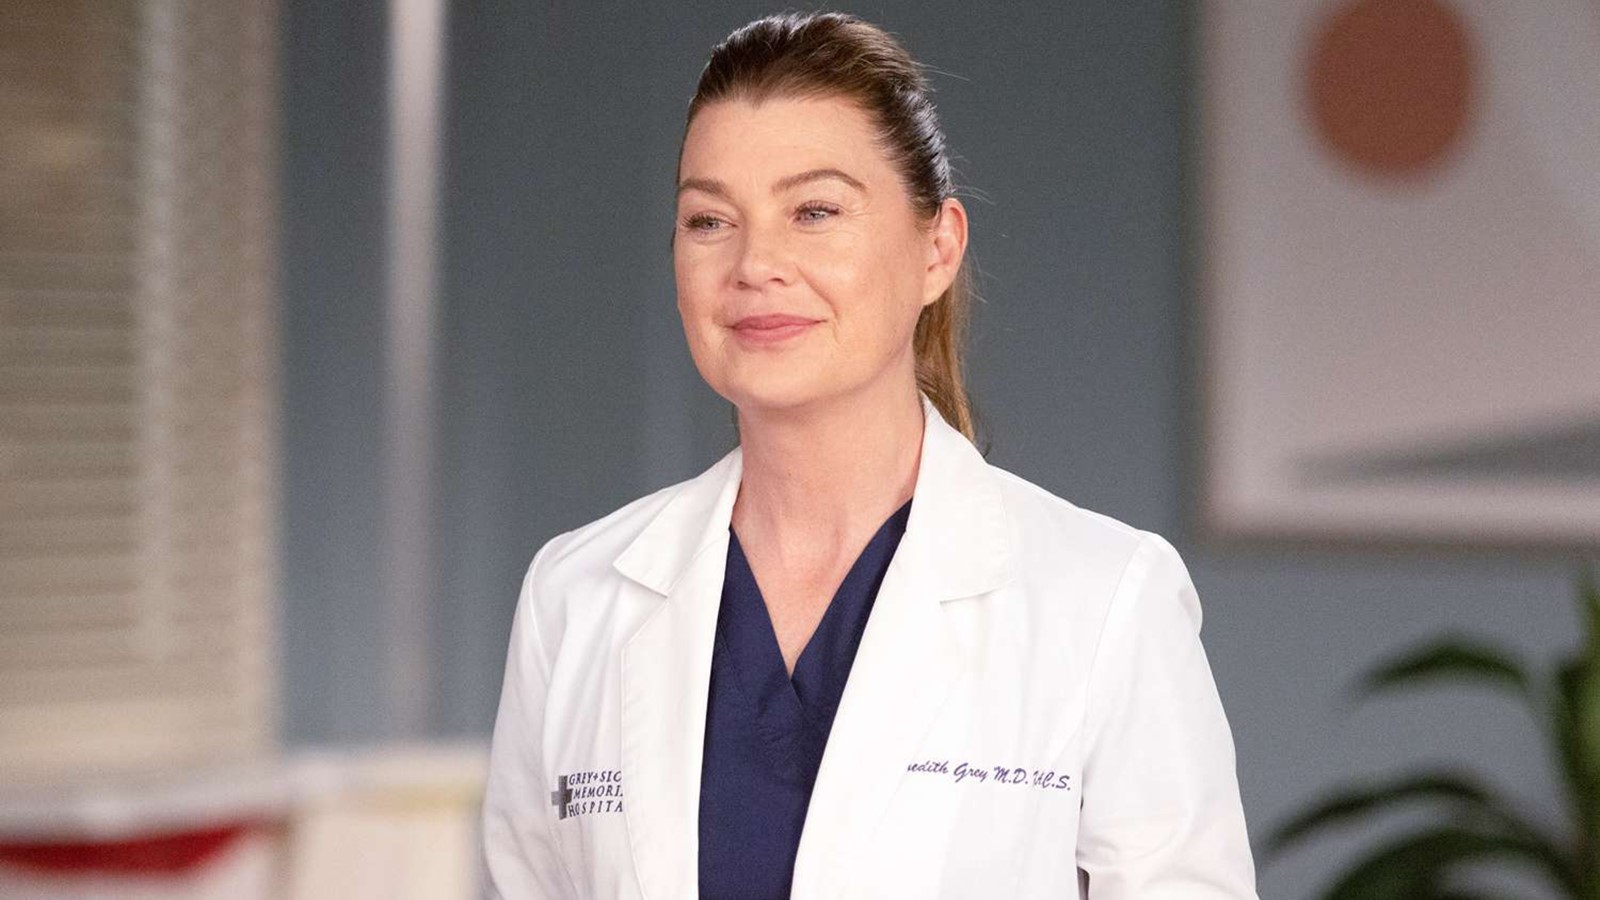 Grey's Anatomy will return with season 20: ABC has announced the renewal of the medical drama